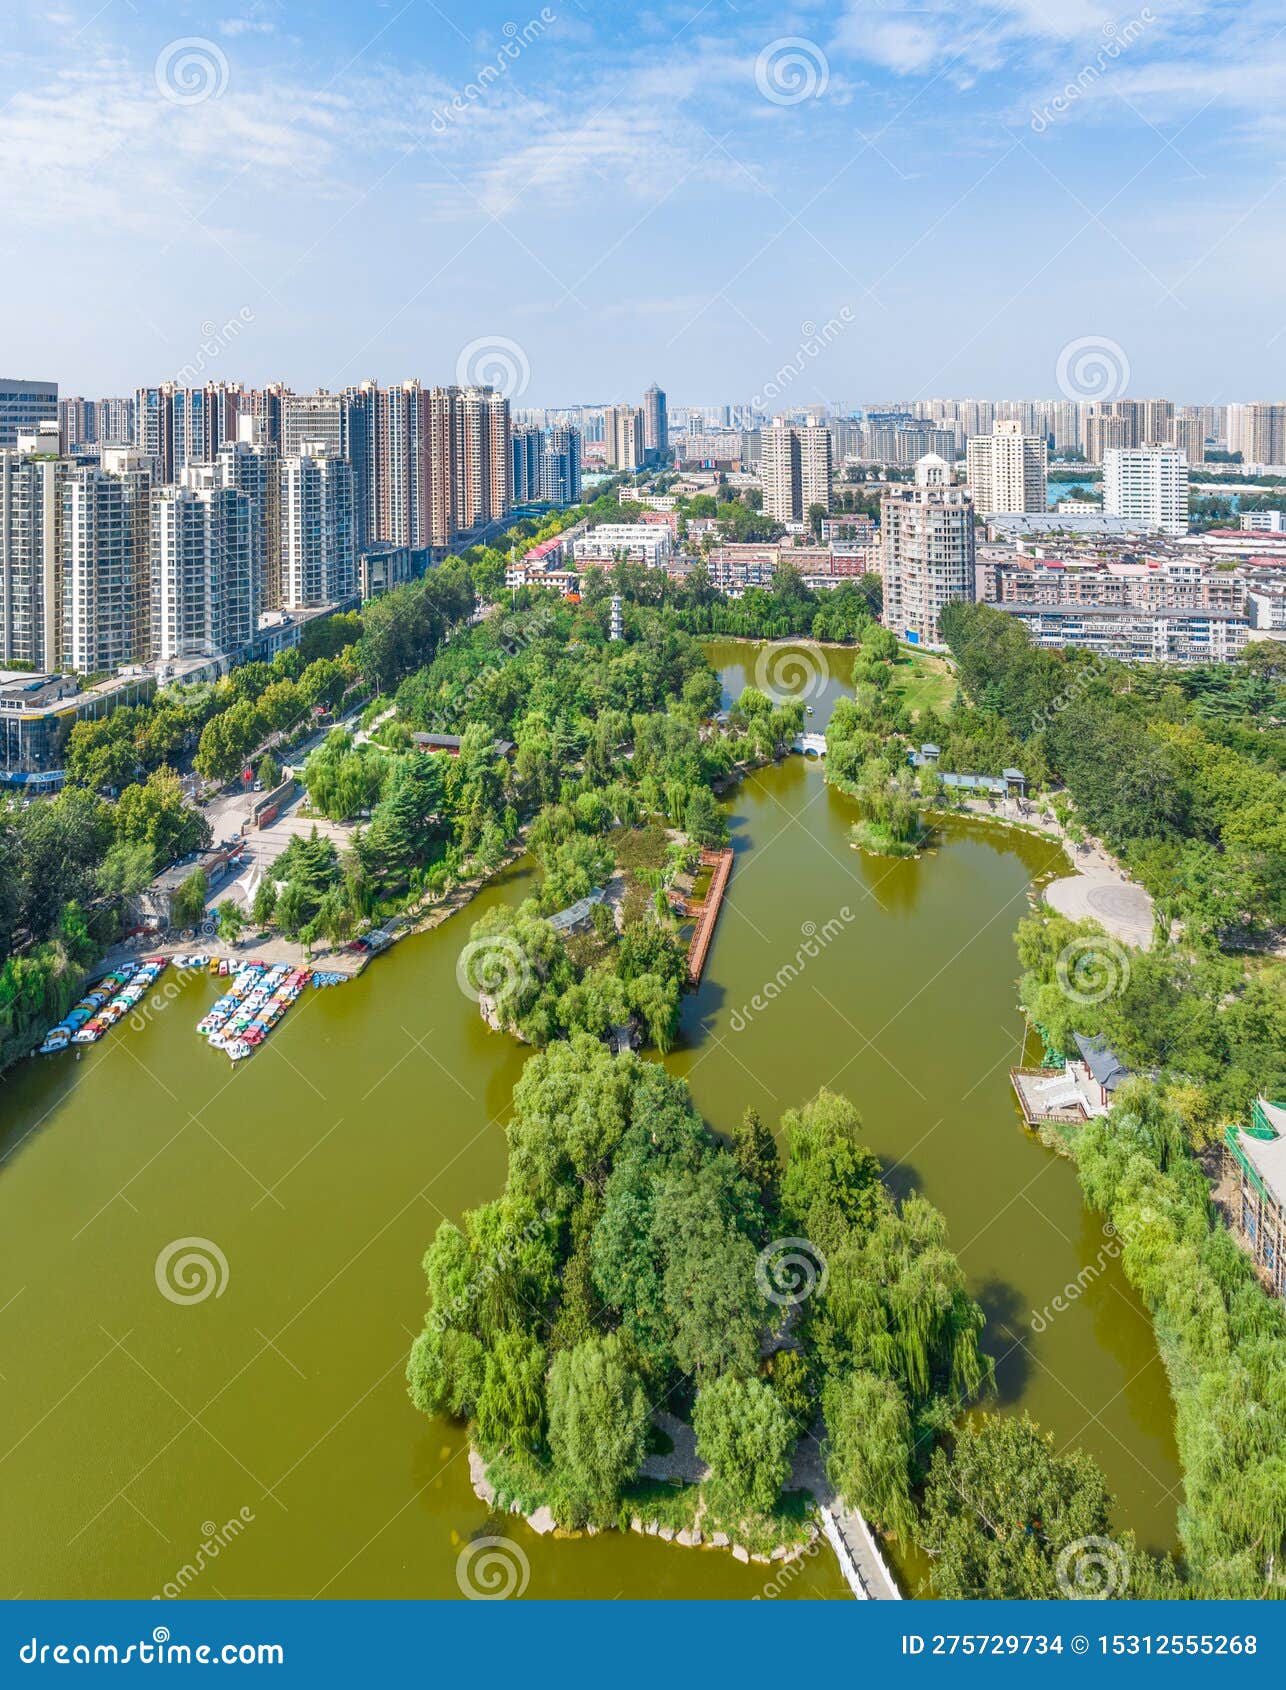 aerial photography of chang'an park and longquan tower in chang'an district, shijiazhuang city, hebei province, china